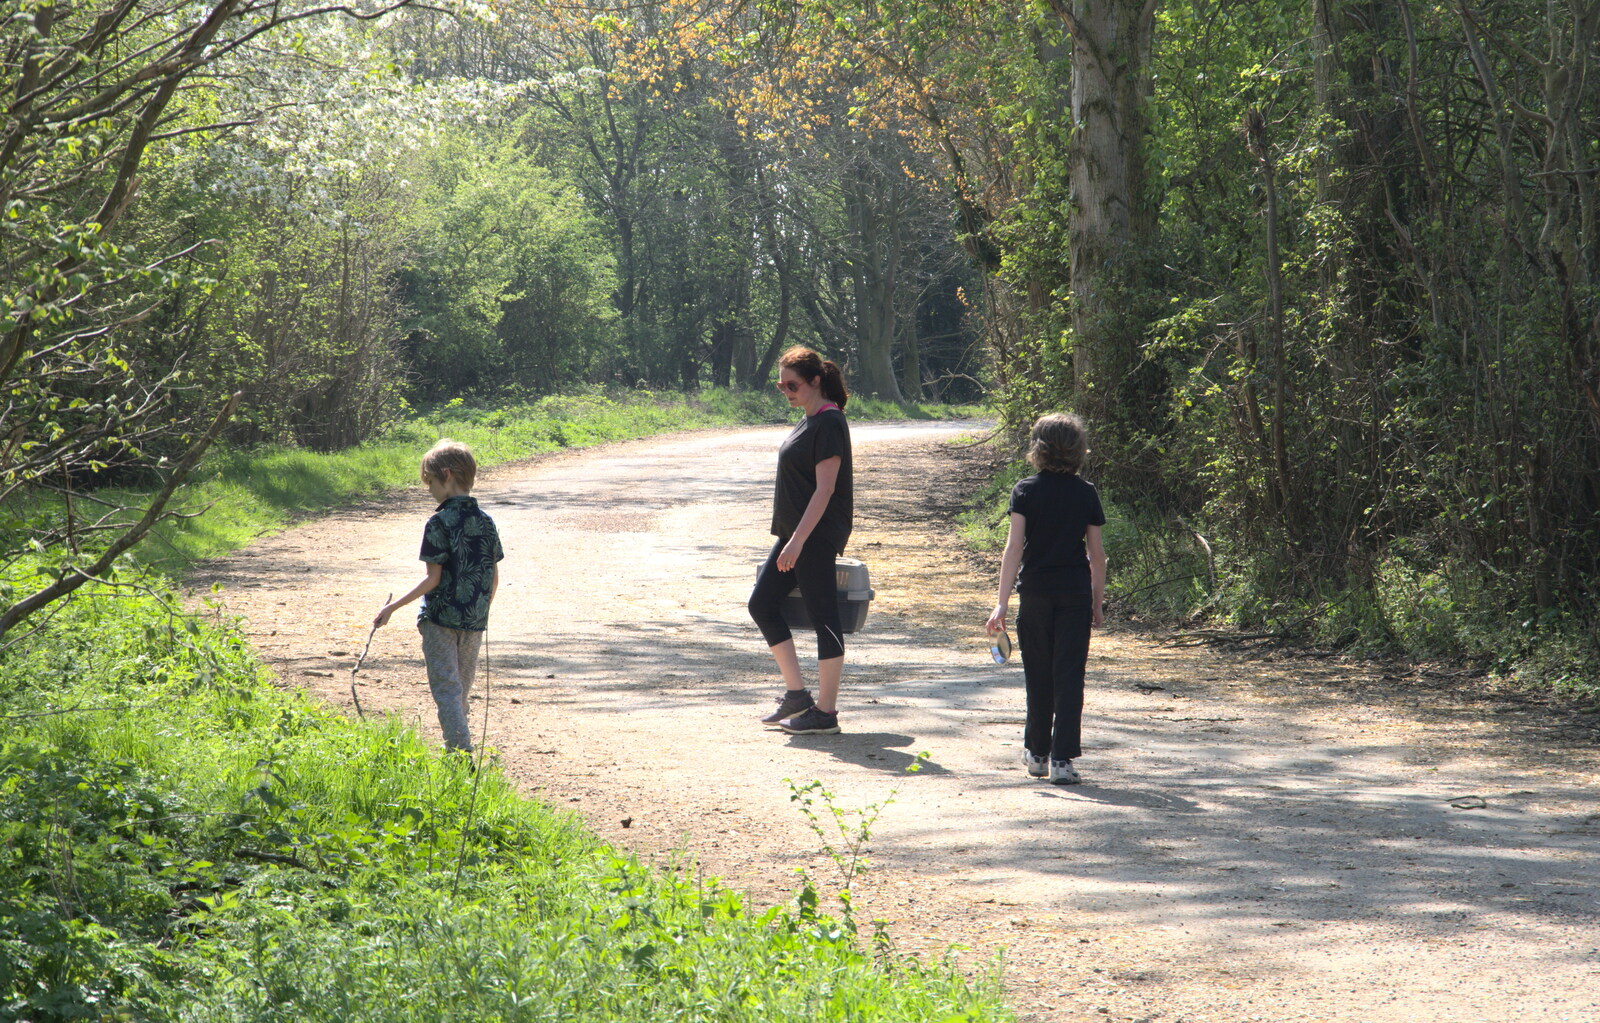 Wandering off towards Nick's Lane from A Weekend Camping Trip in the Garden, Brome, Suffolk - 11th April 2020